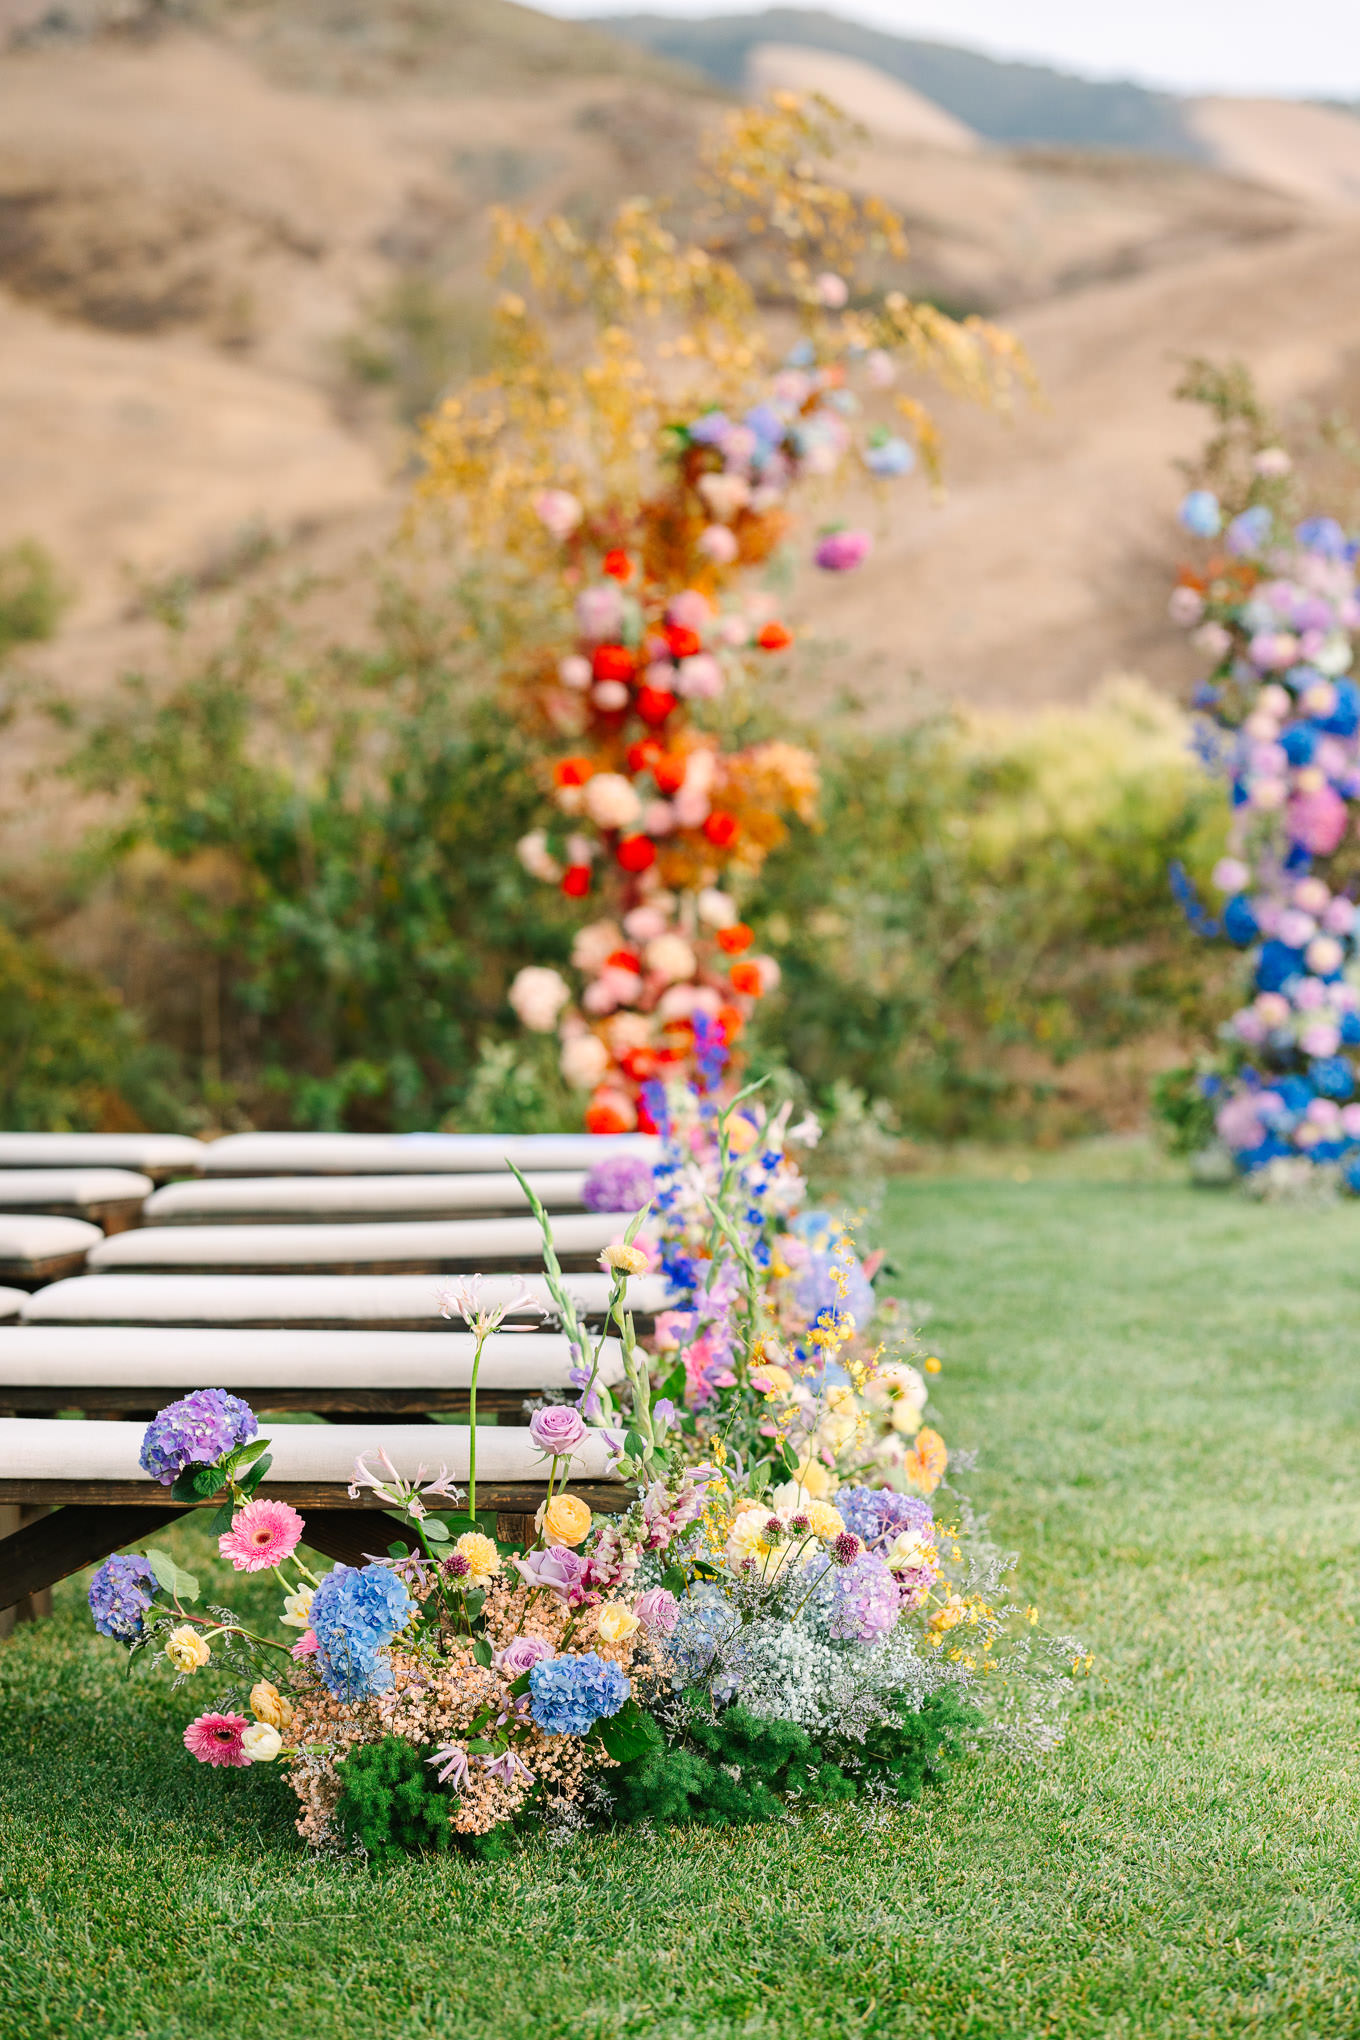 Whimsical and colorful floral installation at wedding ceremony | Colorful and quirky wedding at Higuera Ranch in San Luis Obispo | #sanluisobispowedding #californiawedding #higueraranch #madonnainn   
Source: Mary Costa Photography | Los Angeles
